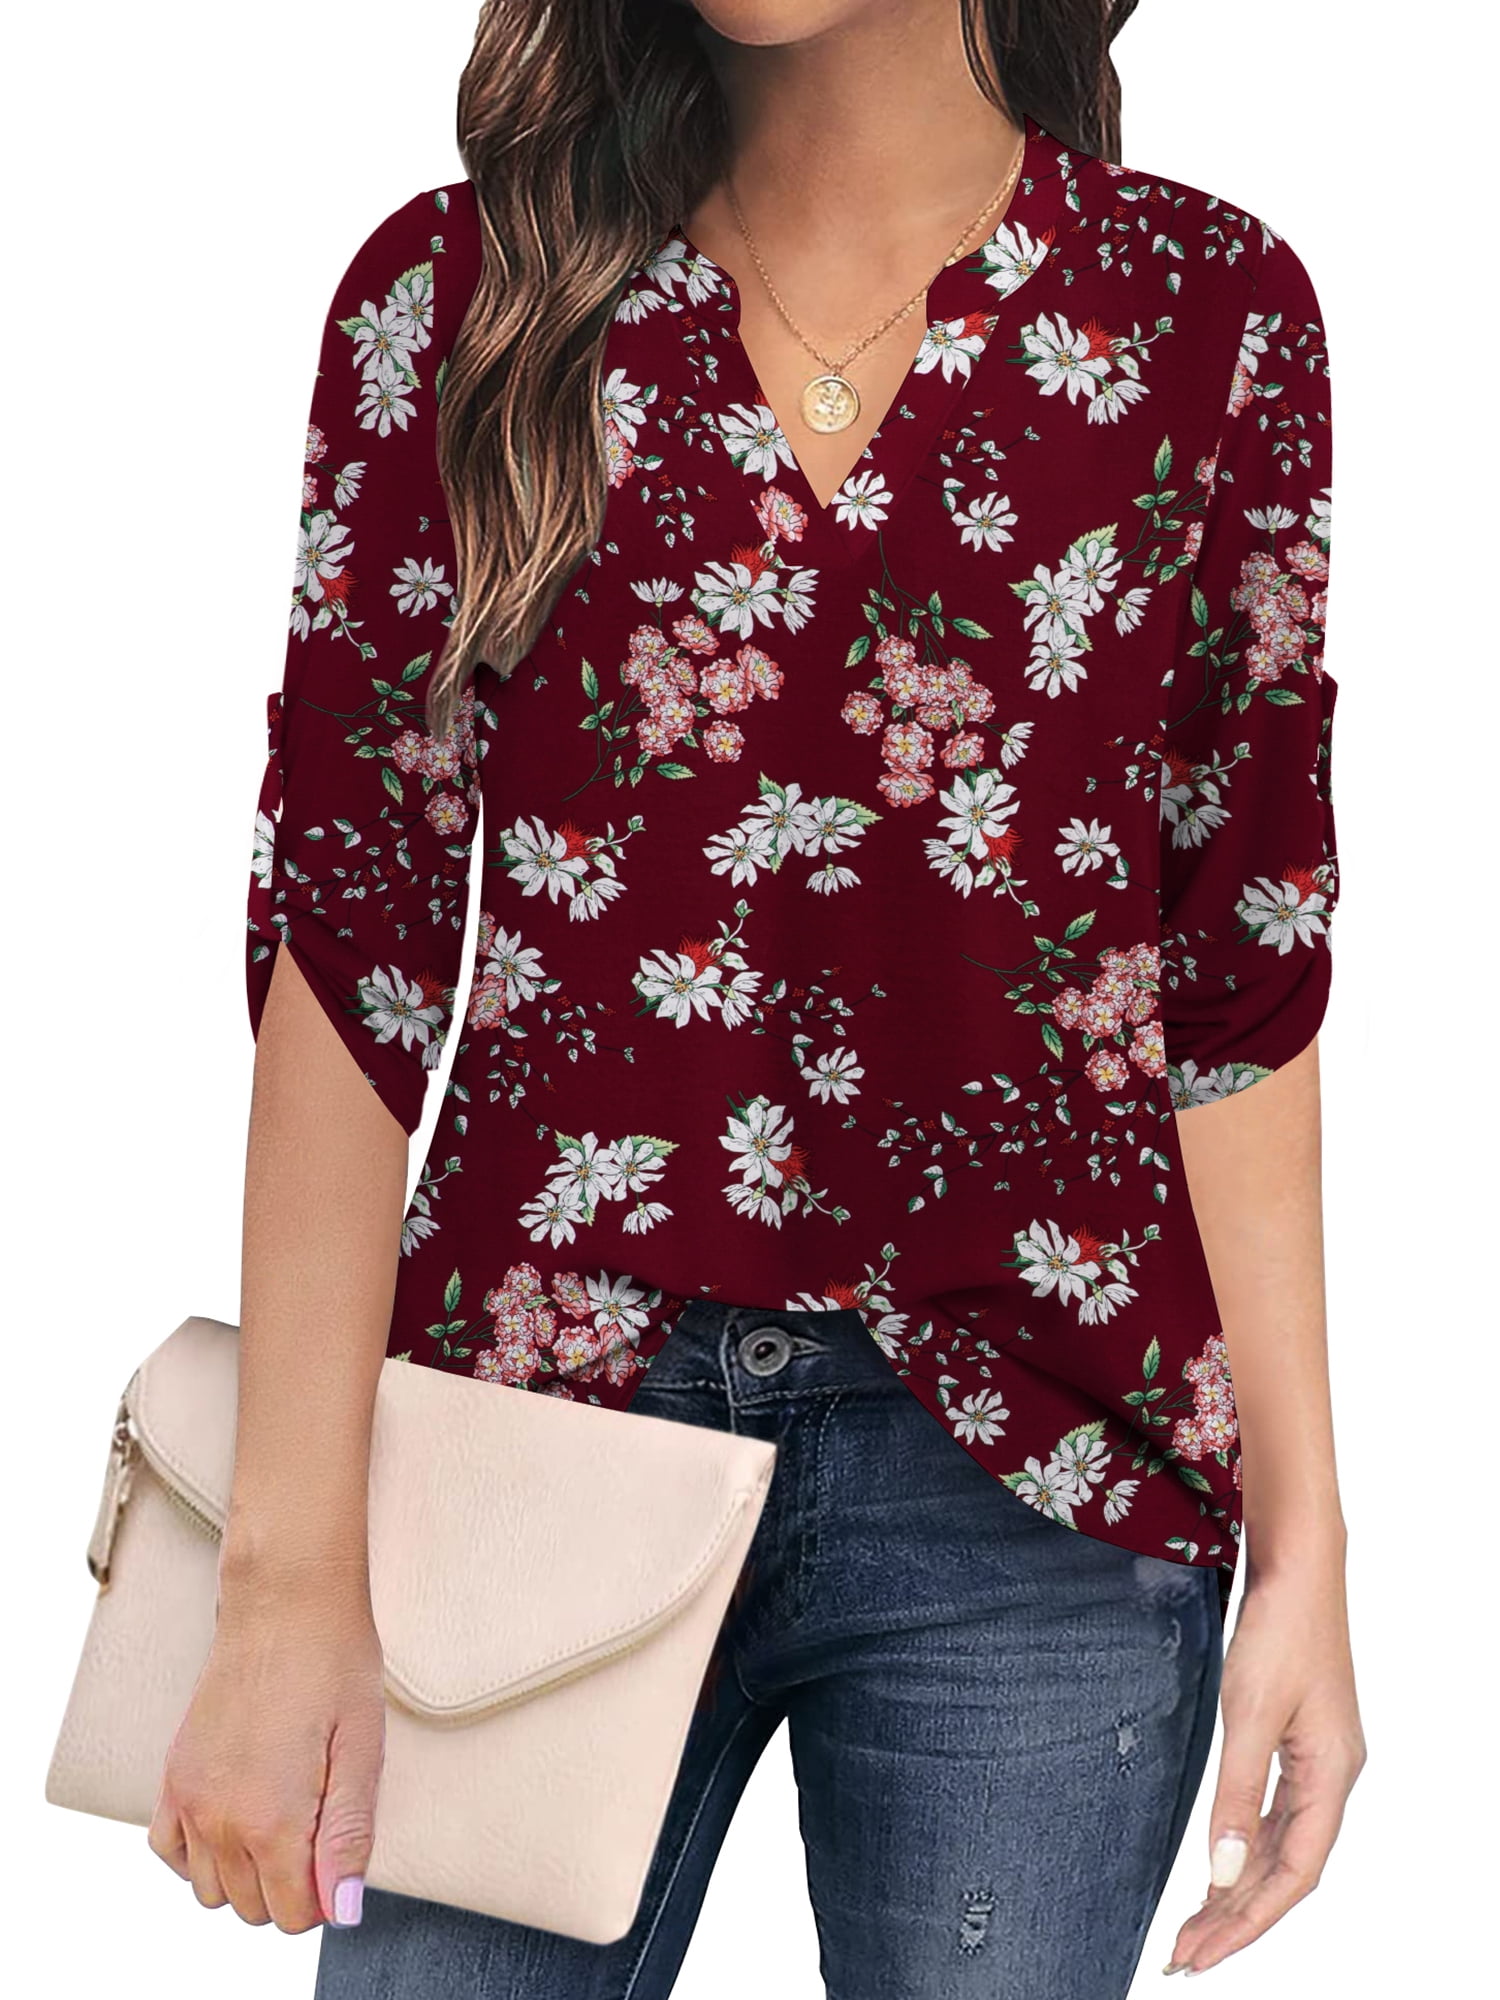 Traleubie Plus Size Floral Tunic Tops for Womens 3/4 Roll Sleeve V Neck ...